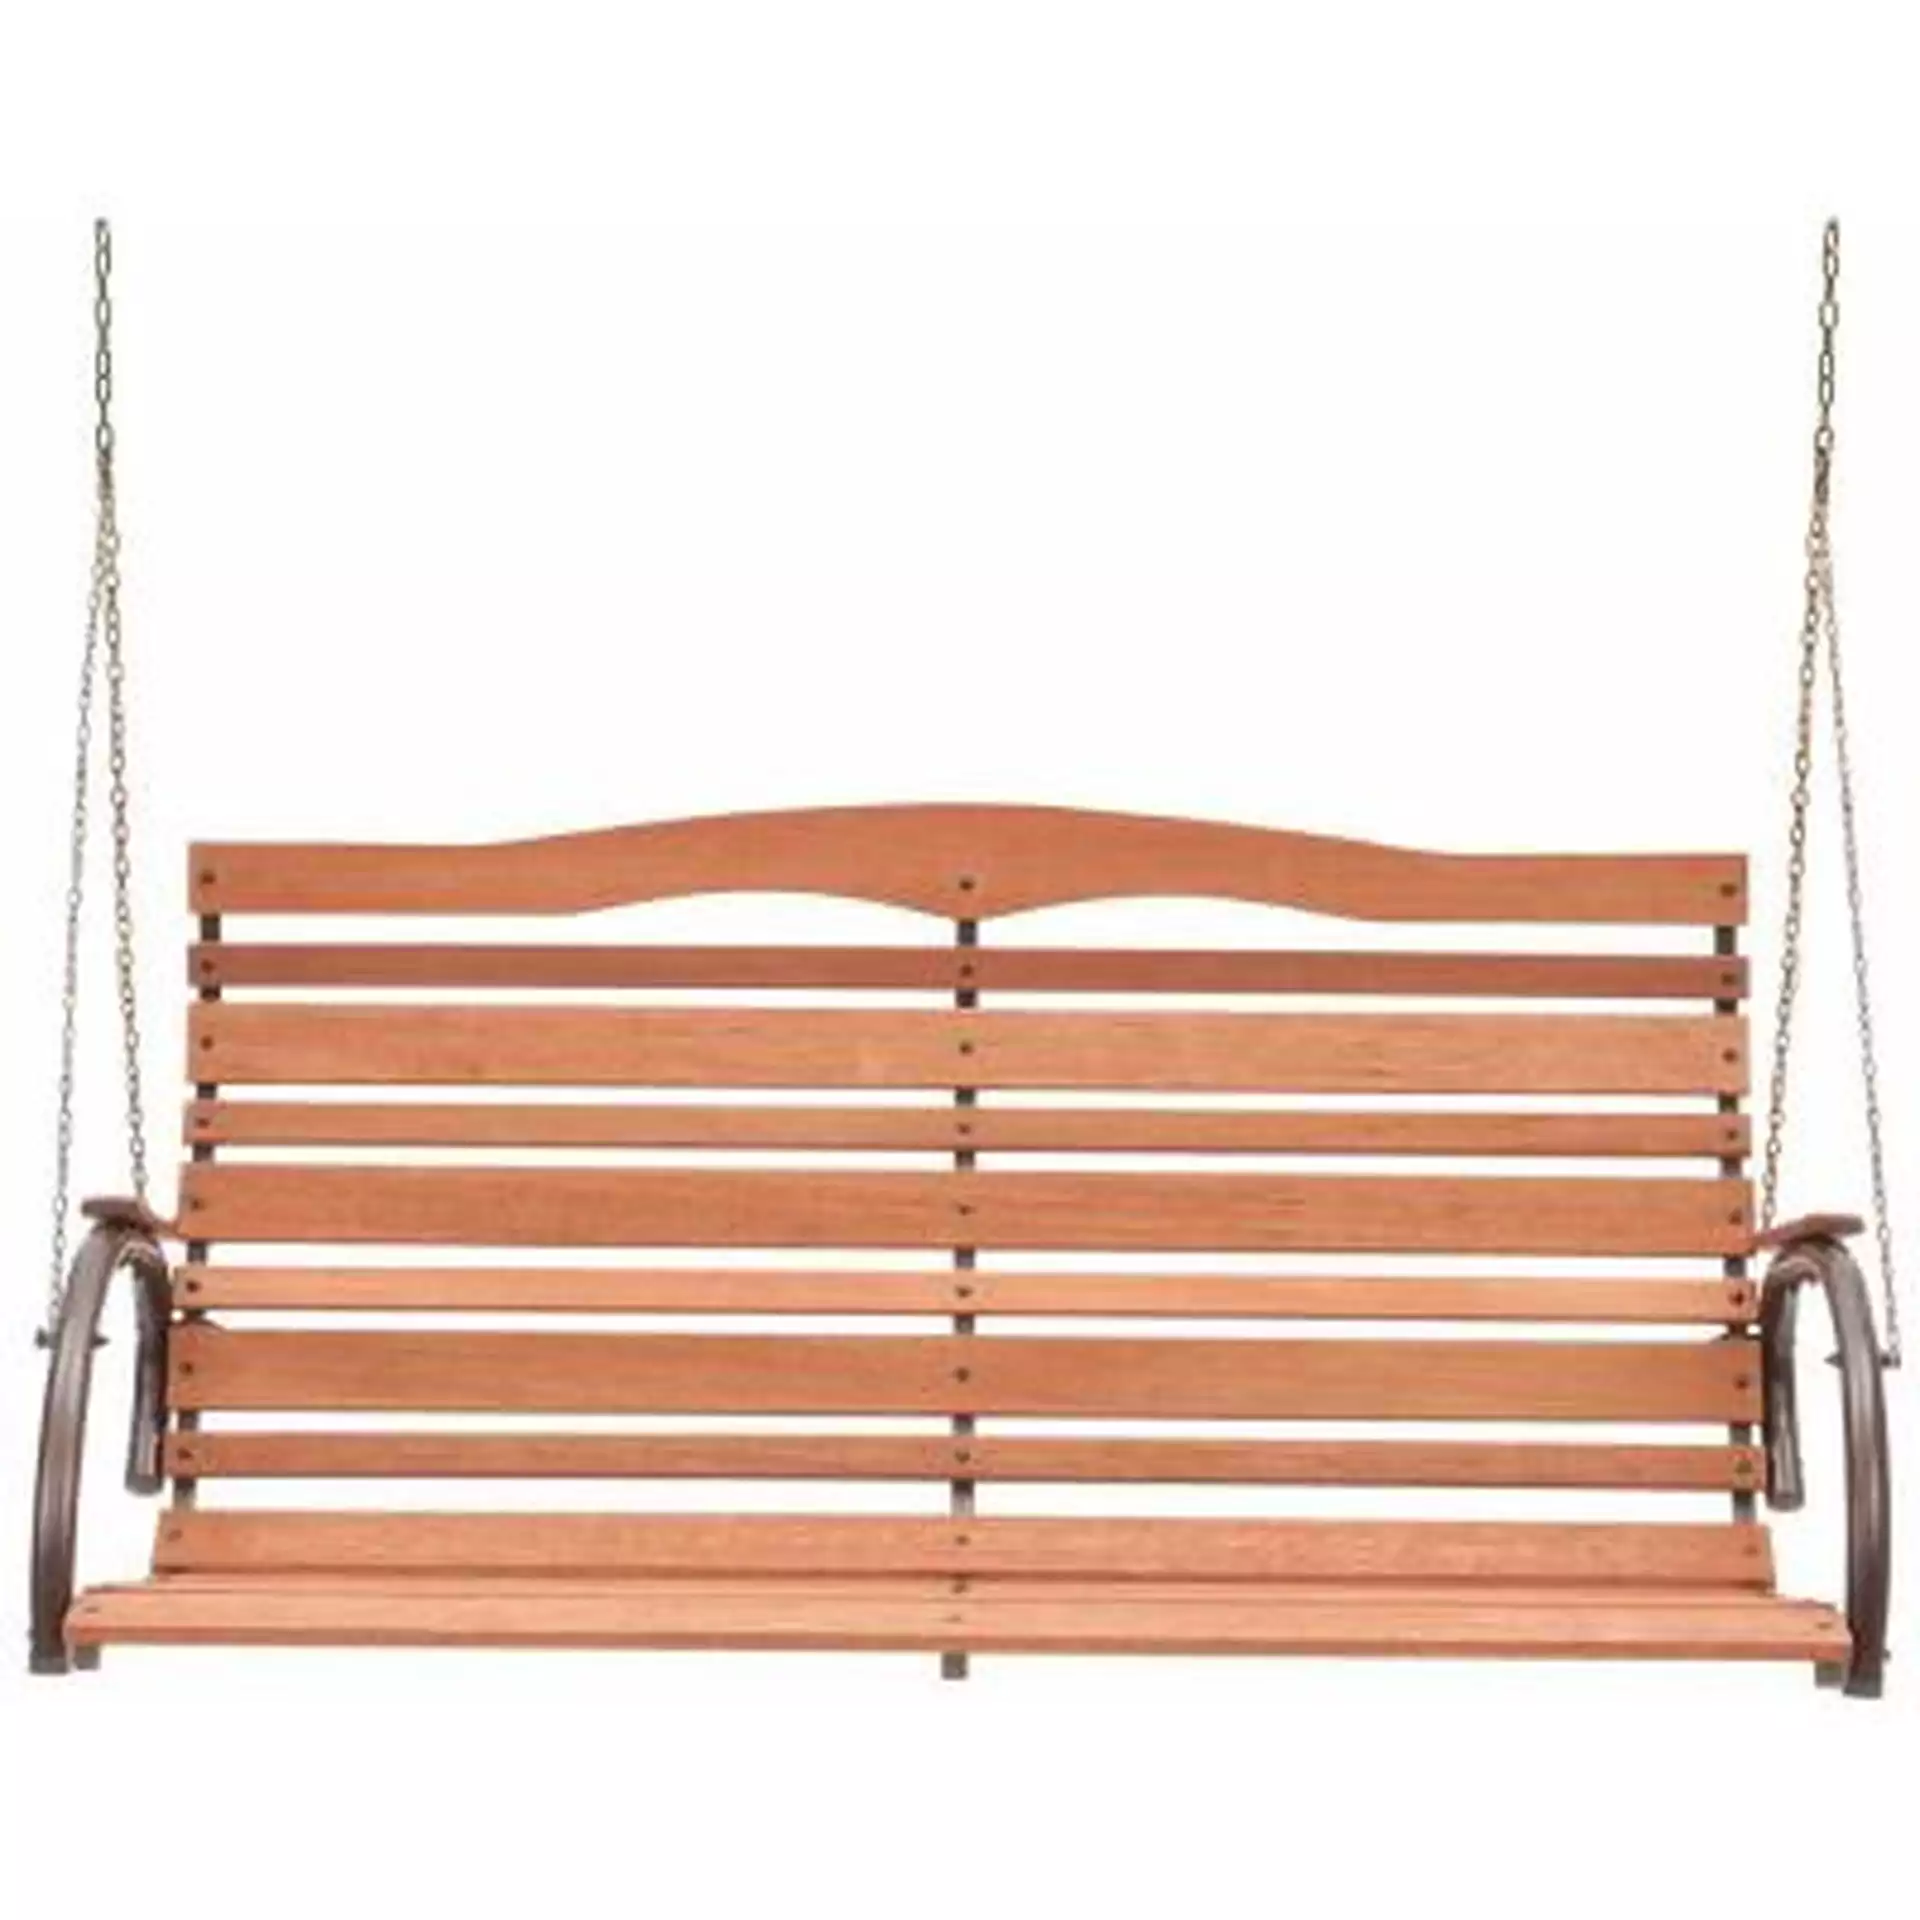 Jack Post Country Garden Hardwood High Back Patio Swing Seat with Chains